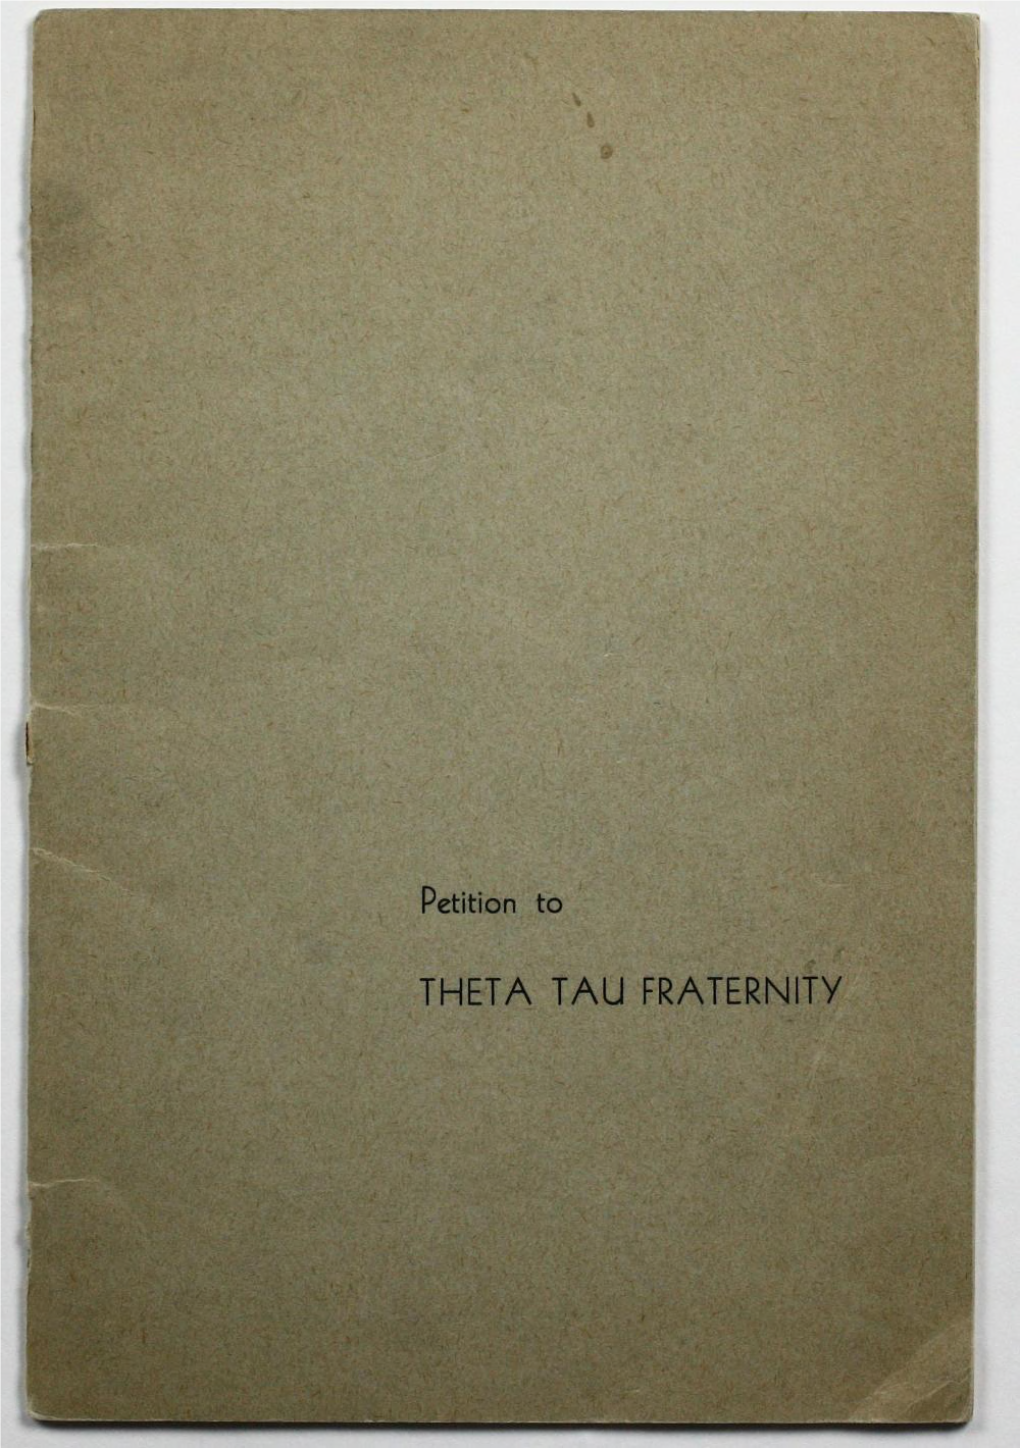 Petition to TH E TA T a U FRATERNITY